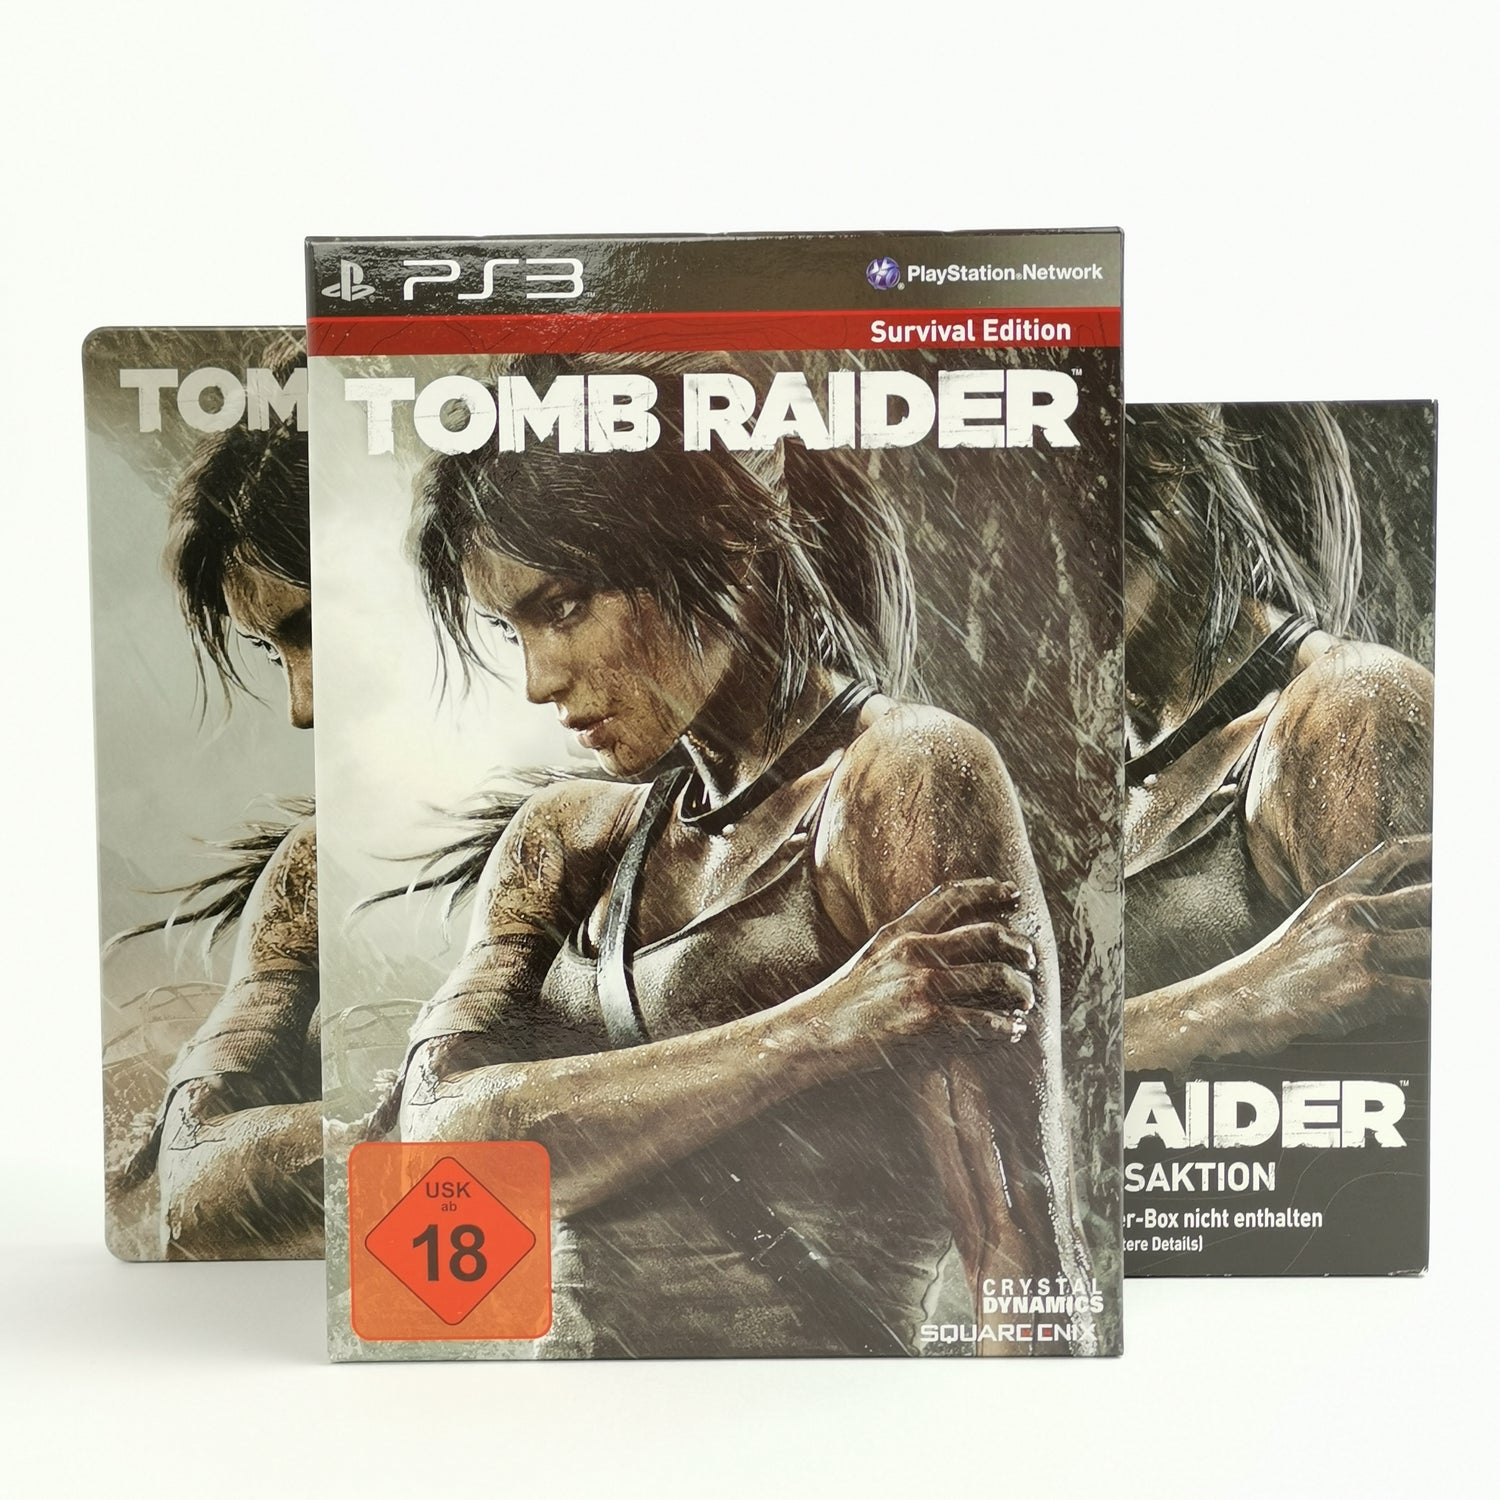 Sony Playstation 3 Game: Tomb Raider Survival Edition | PS3 Game - OVP USK18